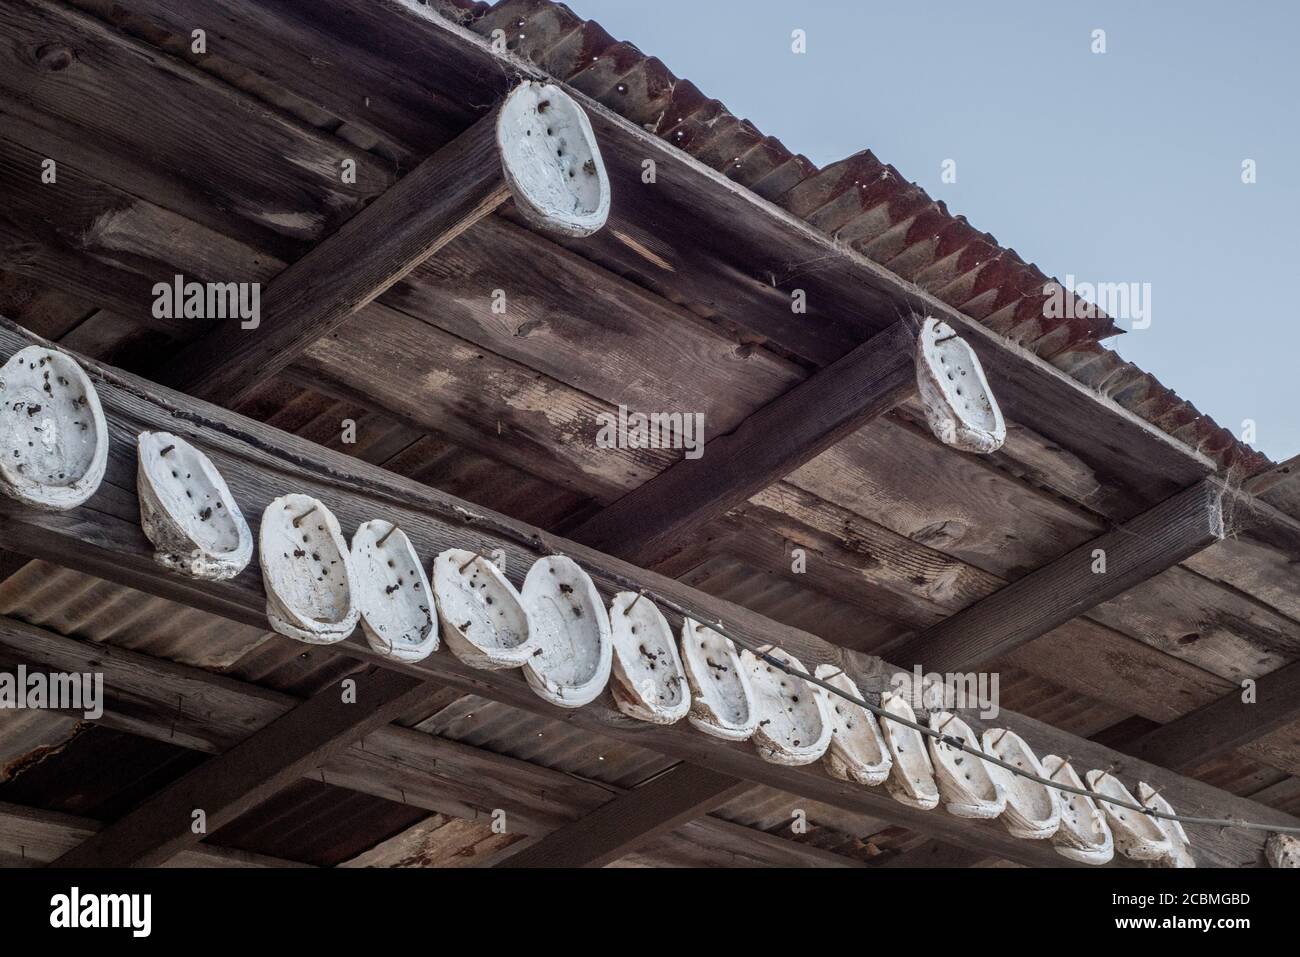 A line of Abalone shells hang at China camp state park in California. These marine mollusks used to be common but fisheries collapsed. Stock Photo